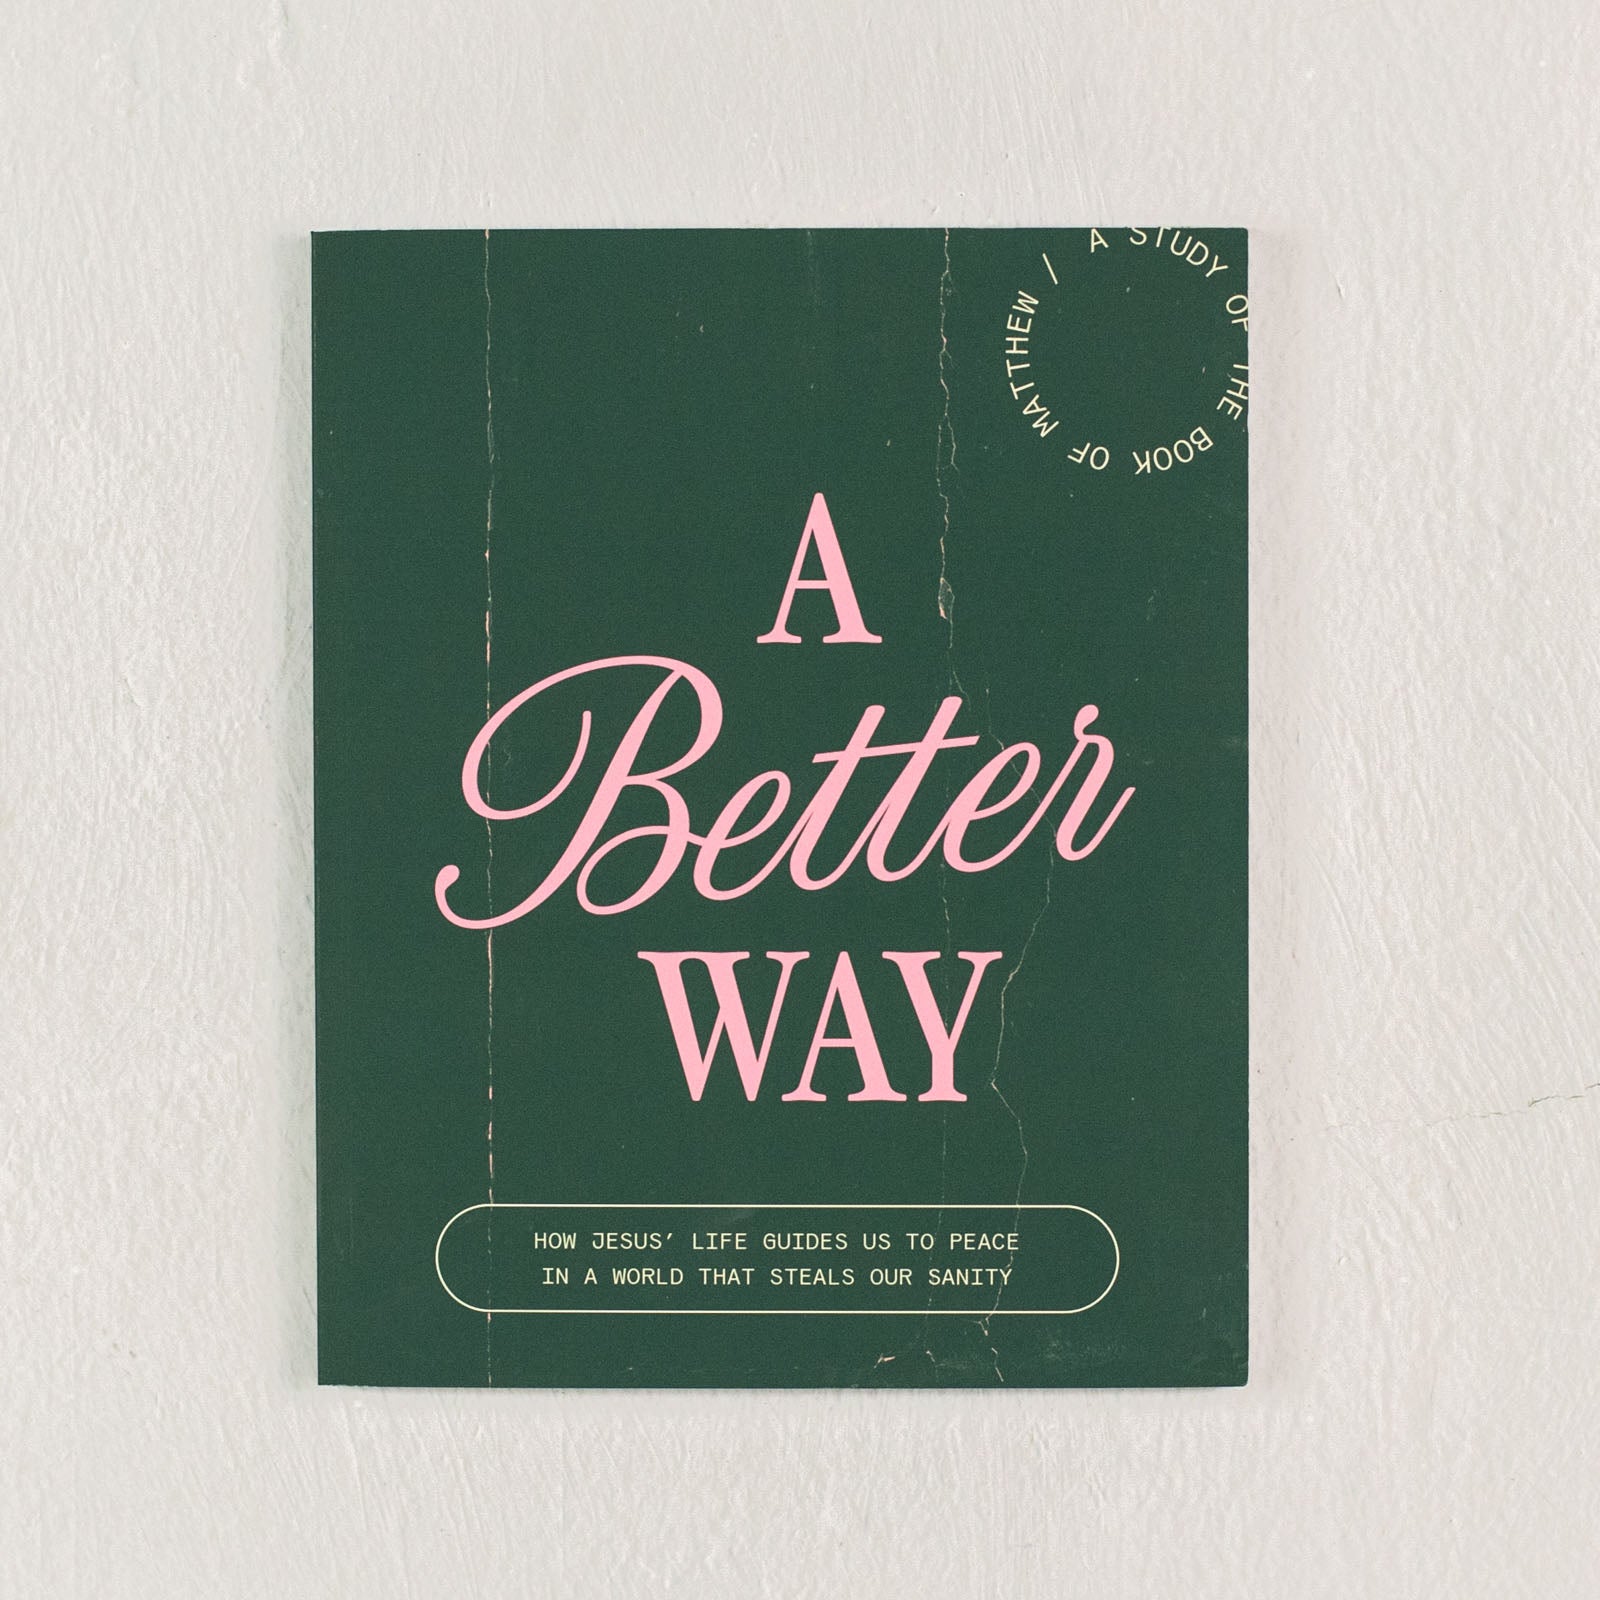 A Better Way: A Study of the Book of Matthew